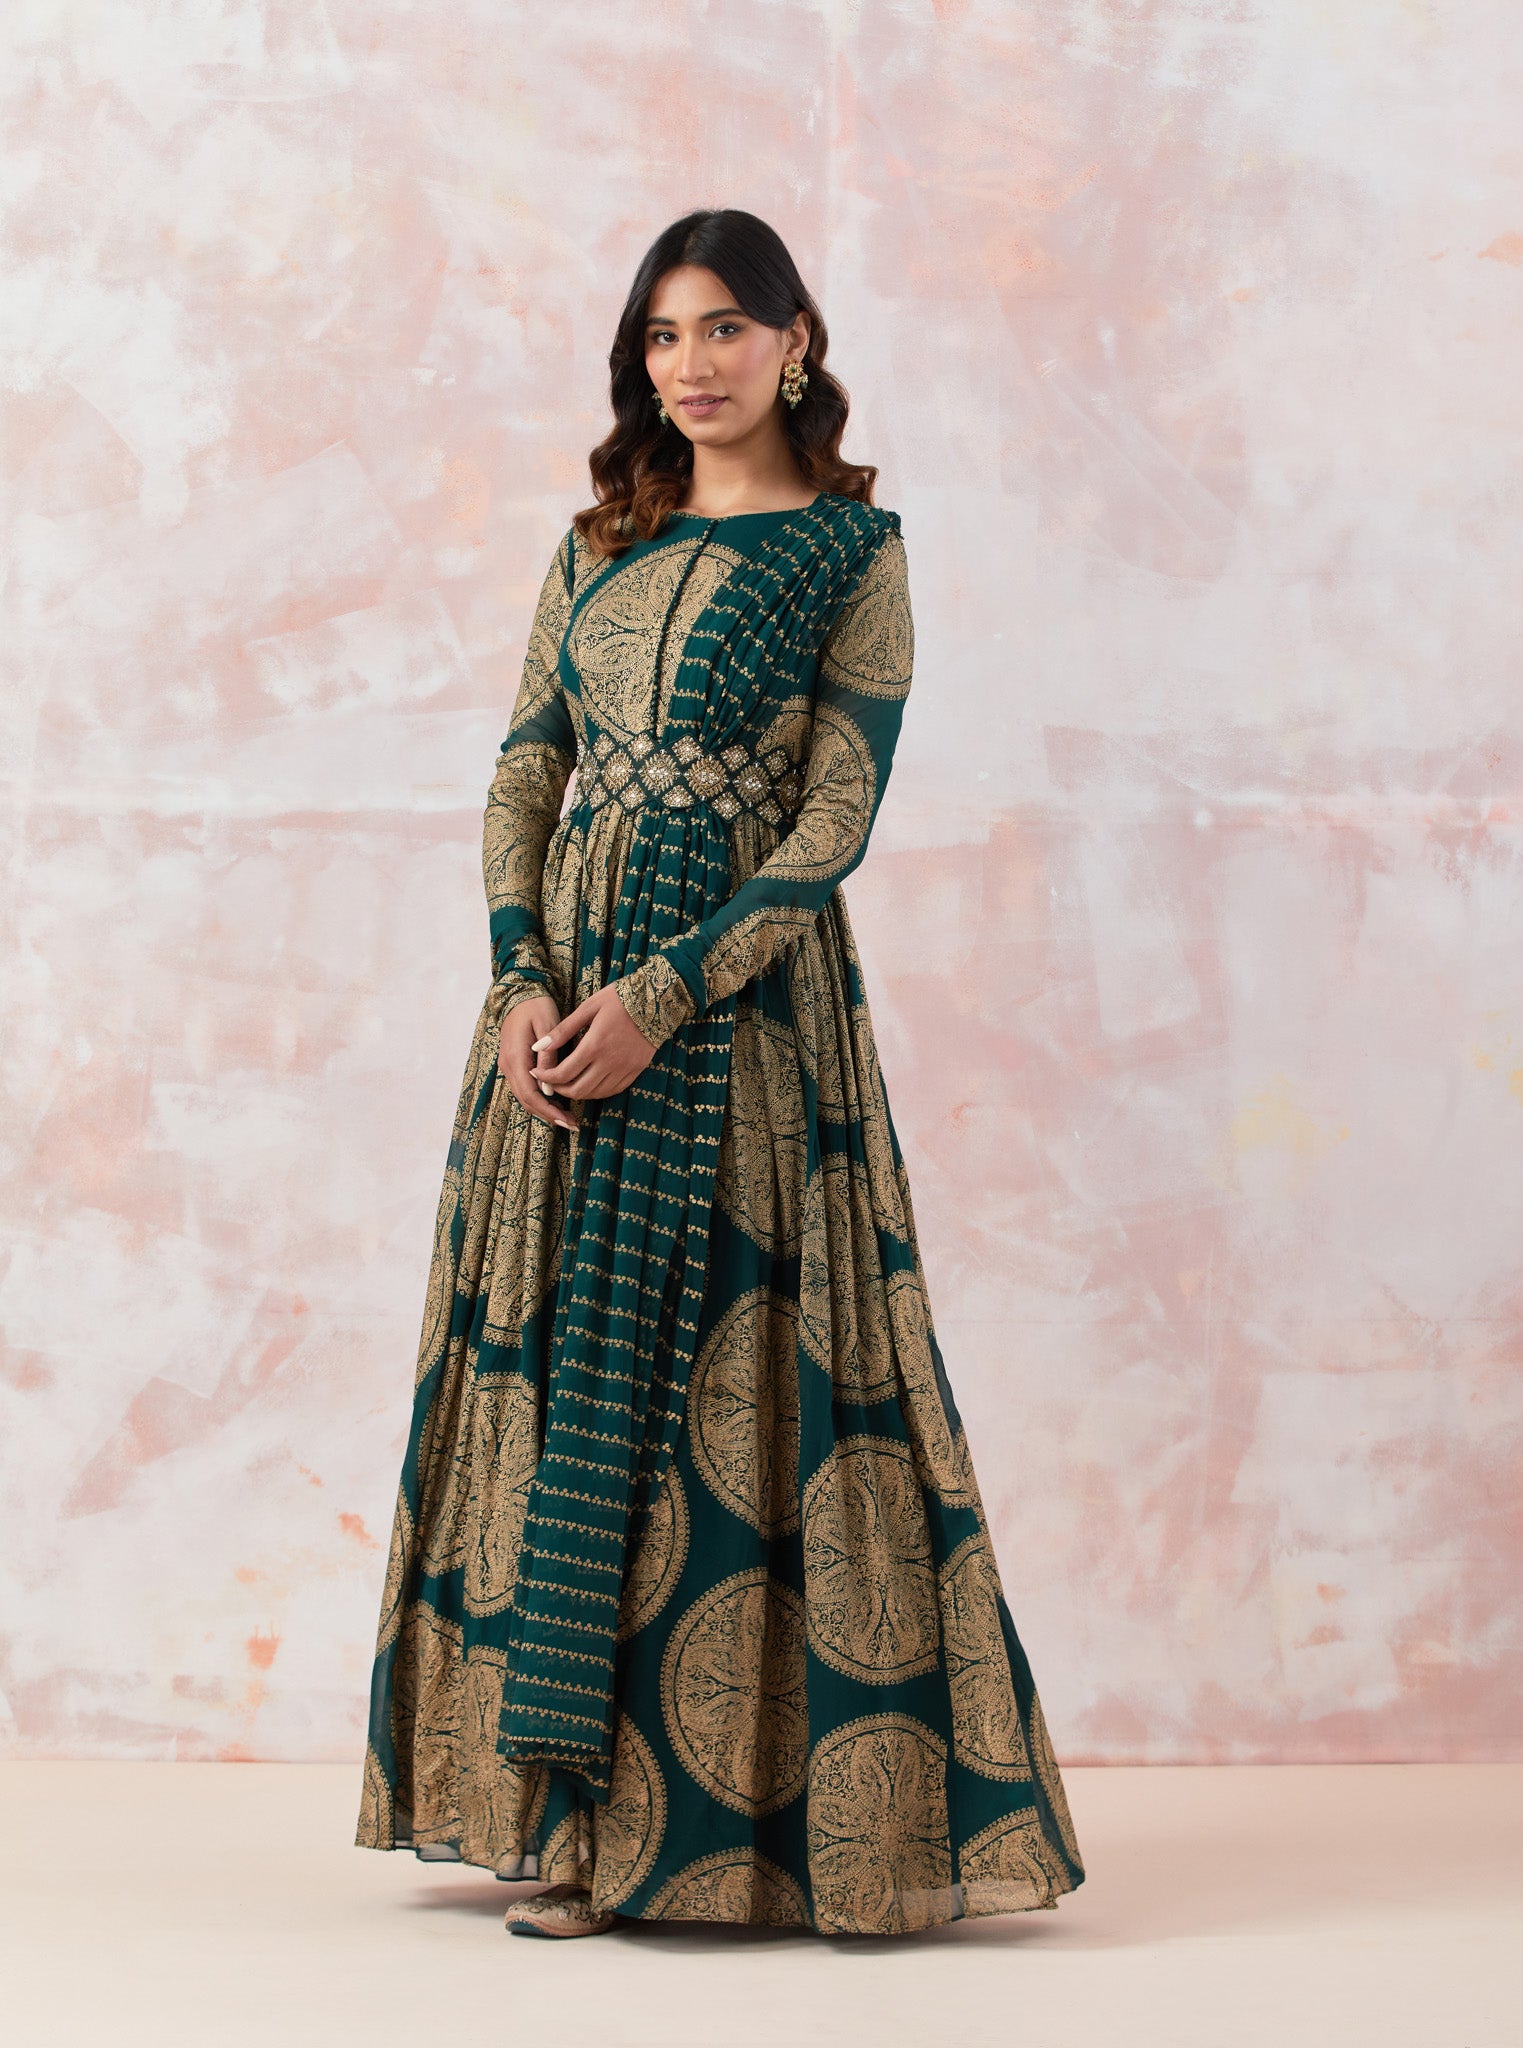 Buy green stylish georgette Anarkali set featuring an all-over foil print, that comes with a pearl embroidery belt. Dazzle on weddings and special occasions with exquisite Indian designer dresses, sharara suits, Anarkali suits, and wedding lehengas from Pure Elegance Indian fashion store in the USA.